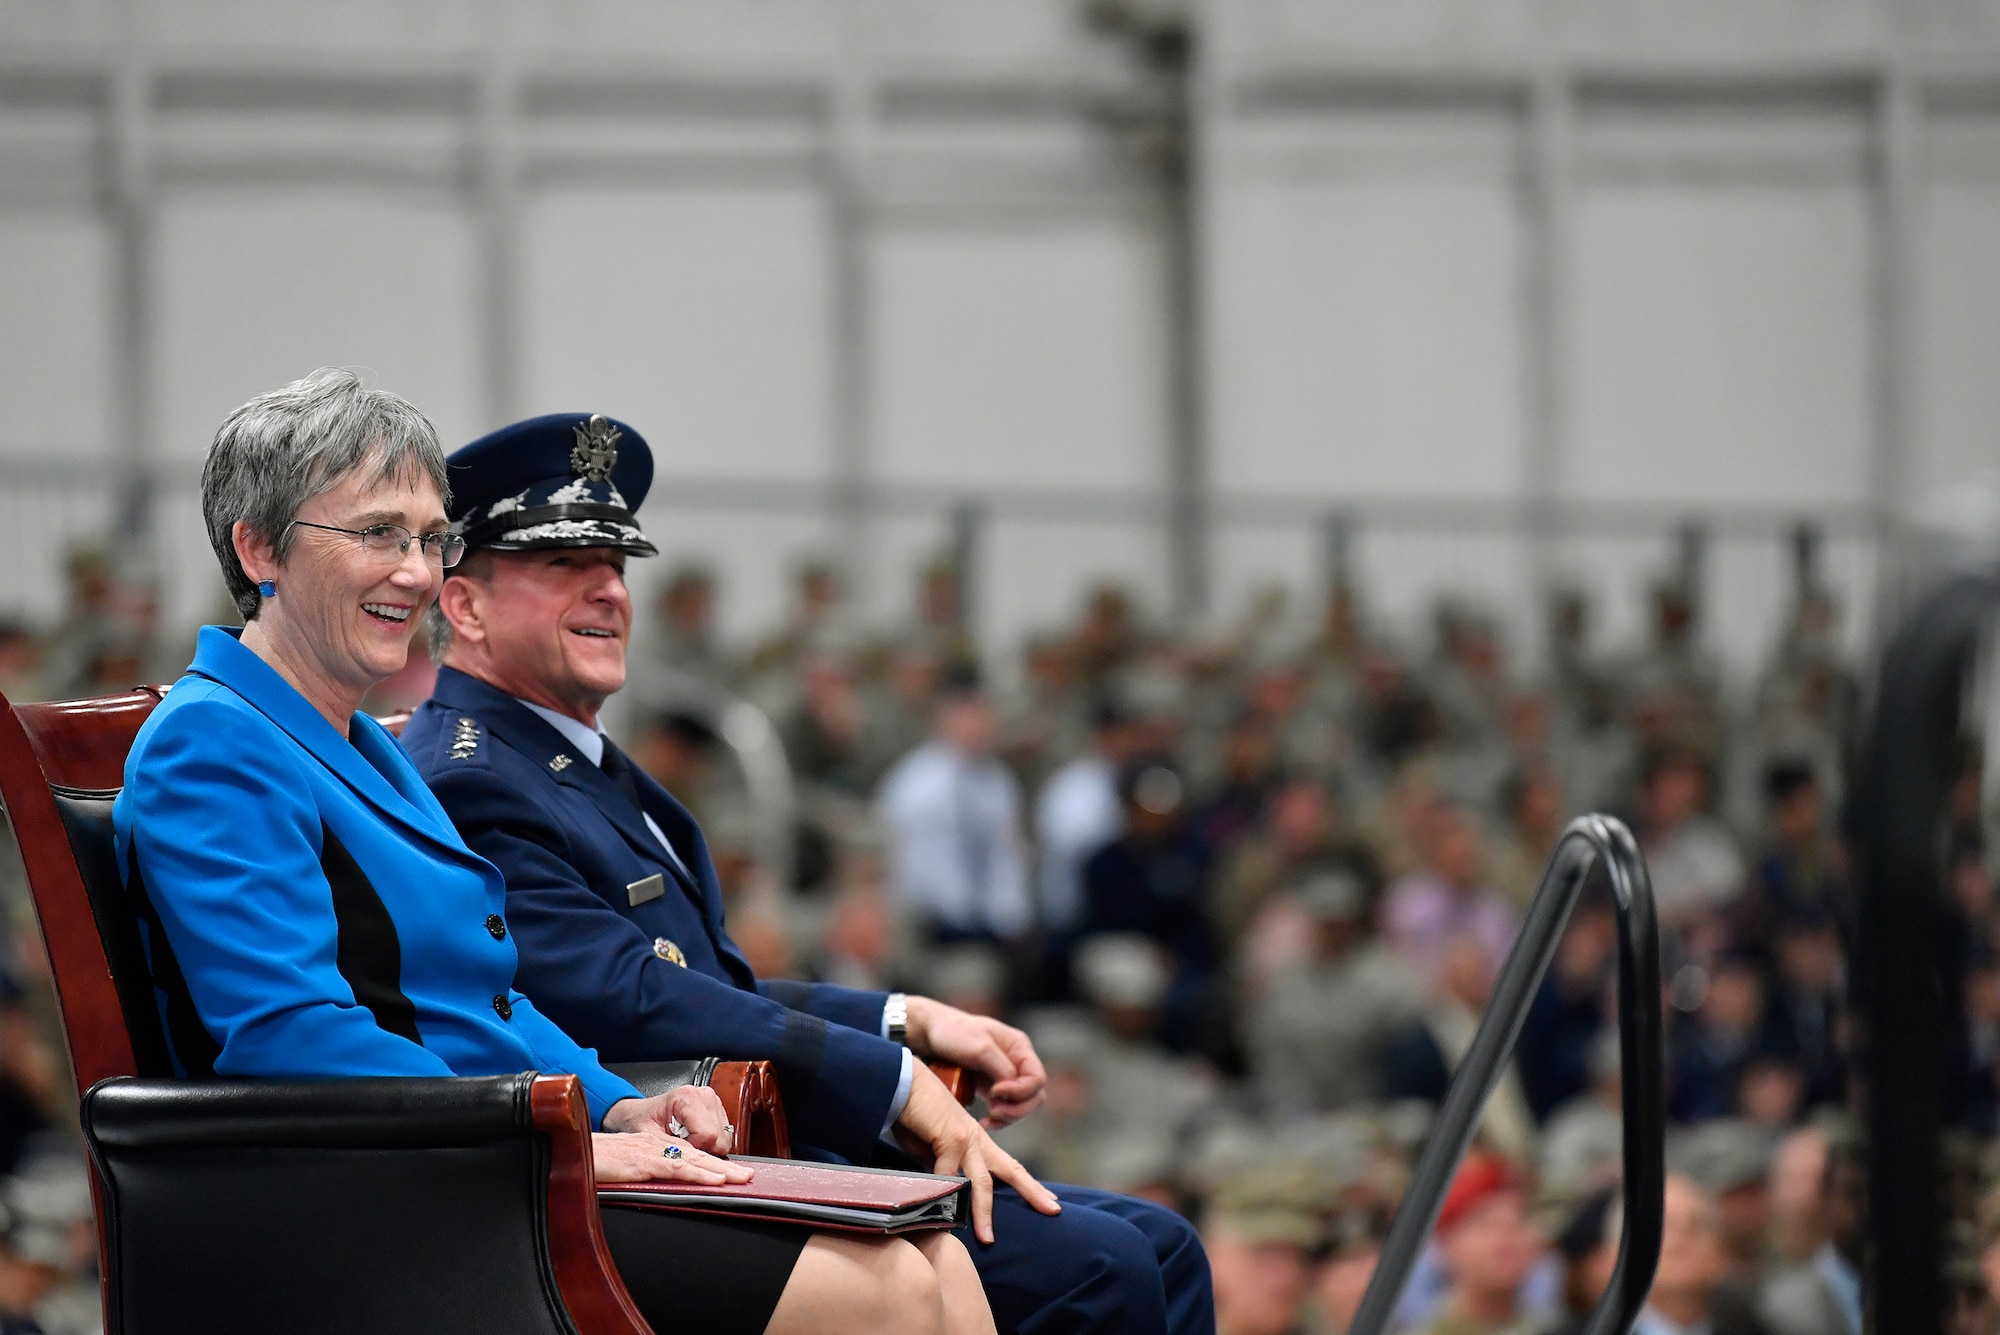 Secretary of the Air Force Heather Wilson and Air Force Chief of Staff Gen. David L. Goldfein smile during the SECAF's farewell ceremony at Joint Base Andrews, Maryland, May 21, 2019. Wilson announced her resignation in March after she was selected to be president of the University of Texas, El Paso; her last day as Air Force secretary was May 31, 2019. (U.S. Air Force photo by Wayne Clark)